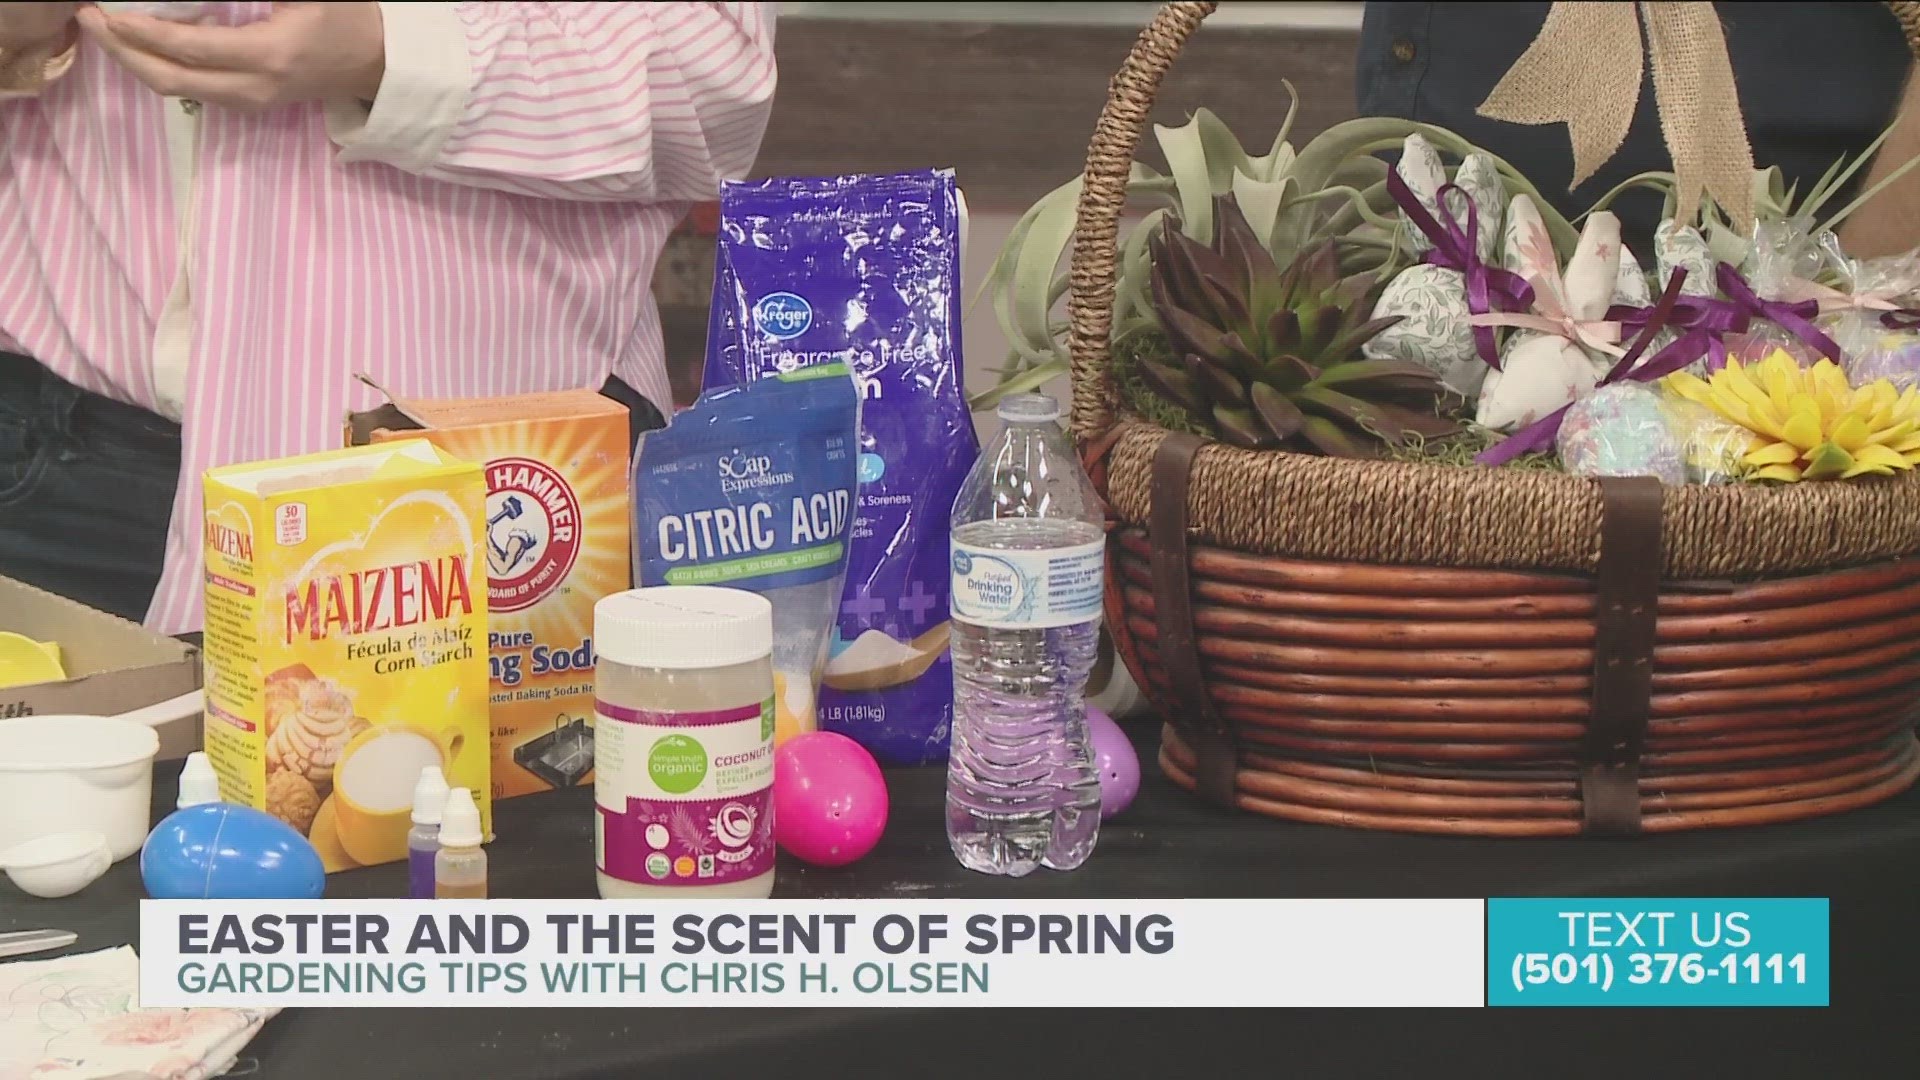 Chris H. Olsen shows us how to bring in the smells of spring with bath bombs and scented fabric bags.